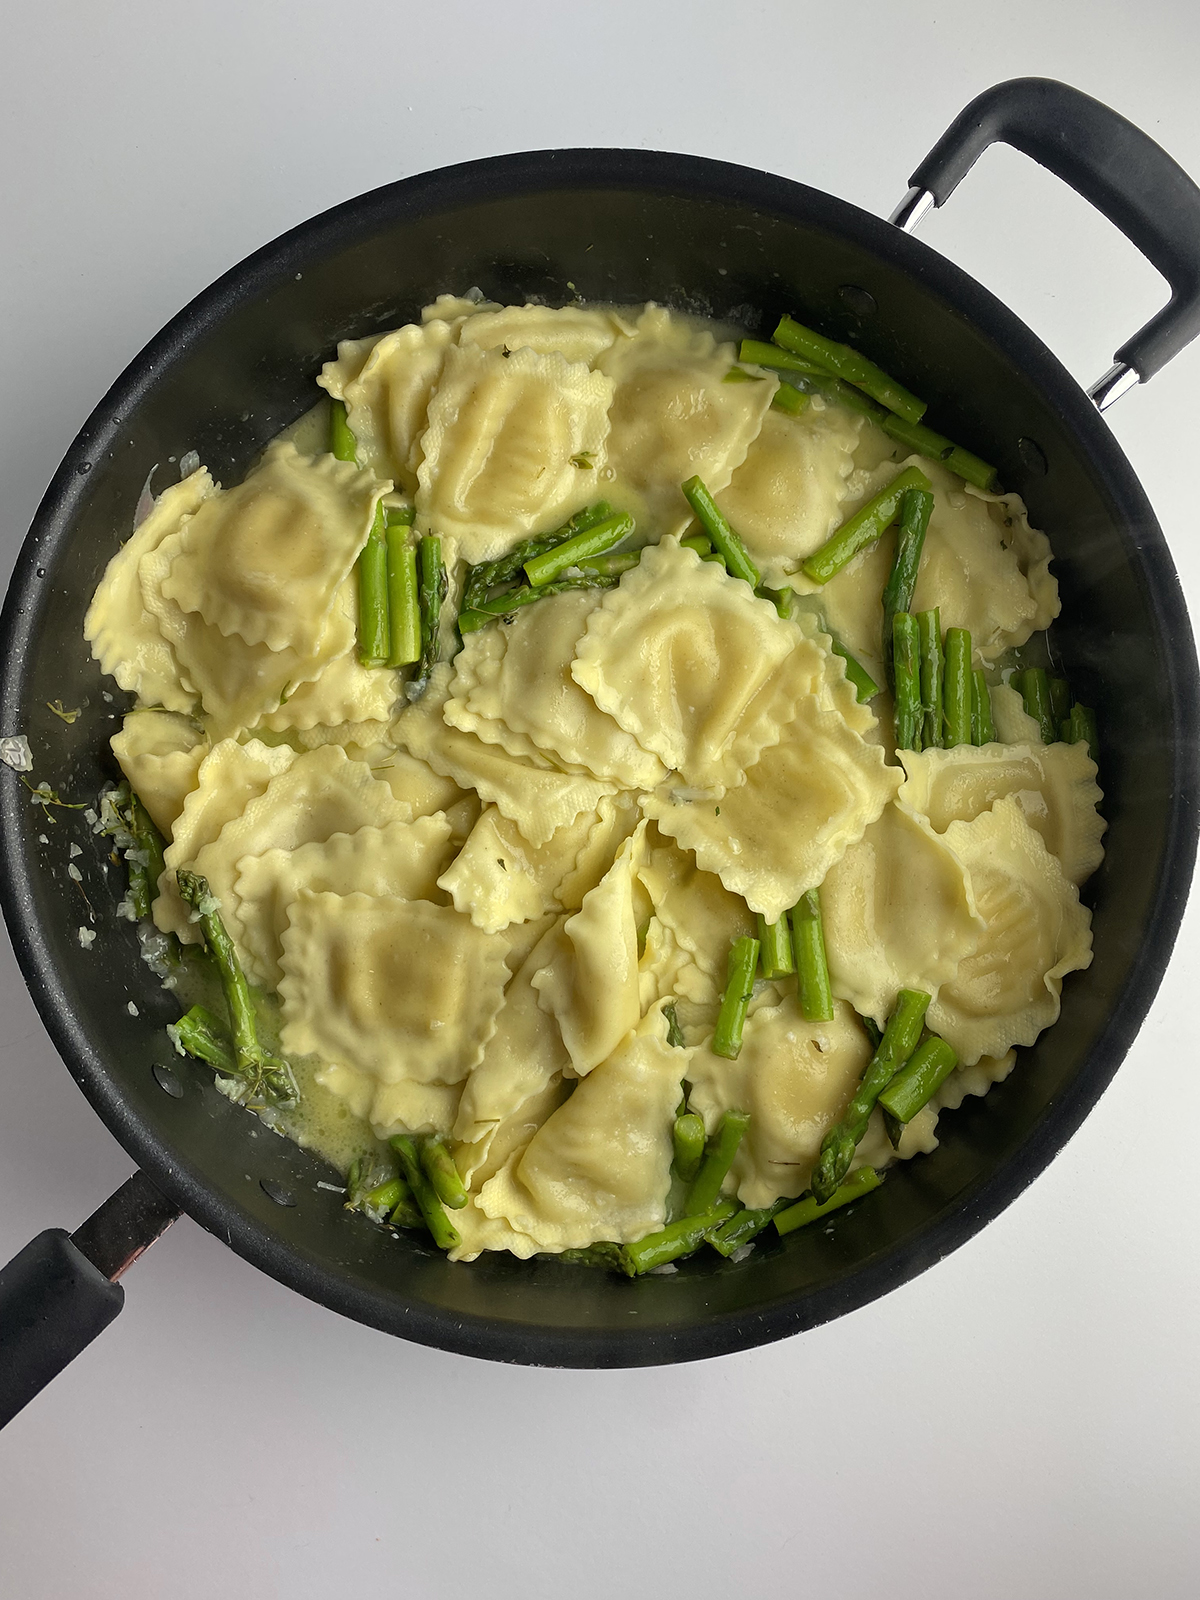 Ravioli and asparagus in pan with sauce.